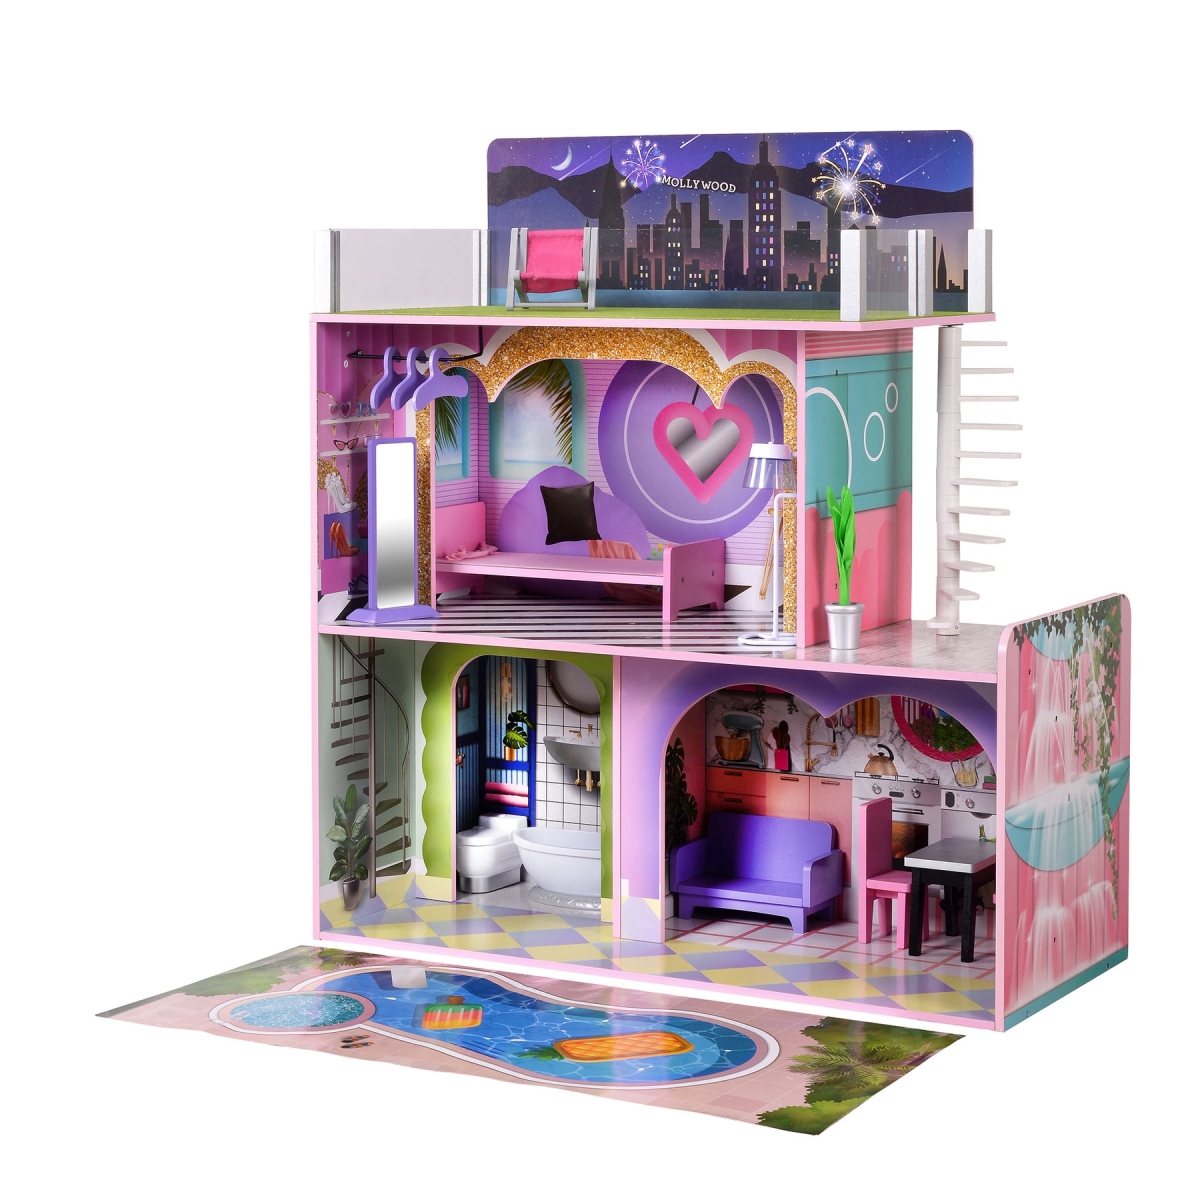 Picture of Teamson TD-13616A Olivias Little World Kids Wooden Dreamland Sunset 3-Level Doll House Set